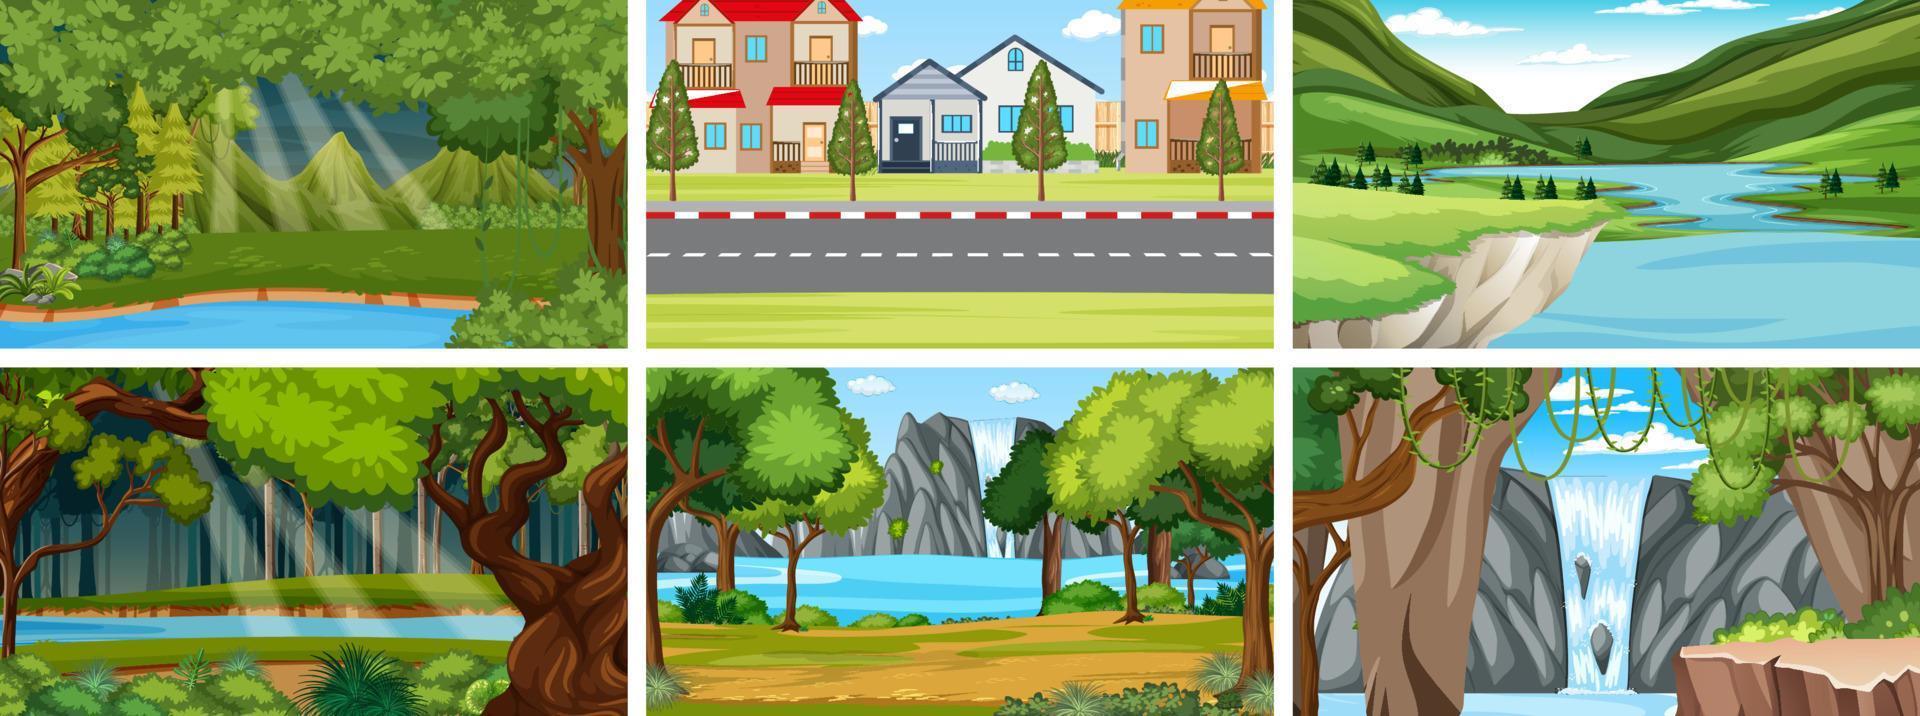 Nature scene with many trees and river vector